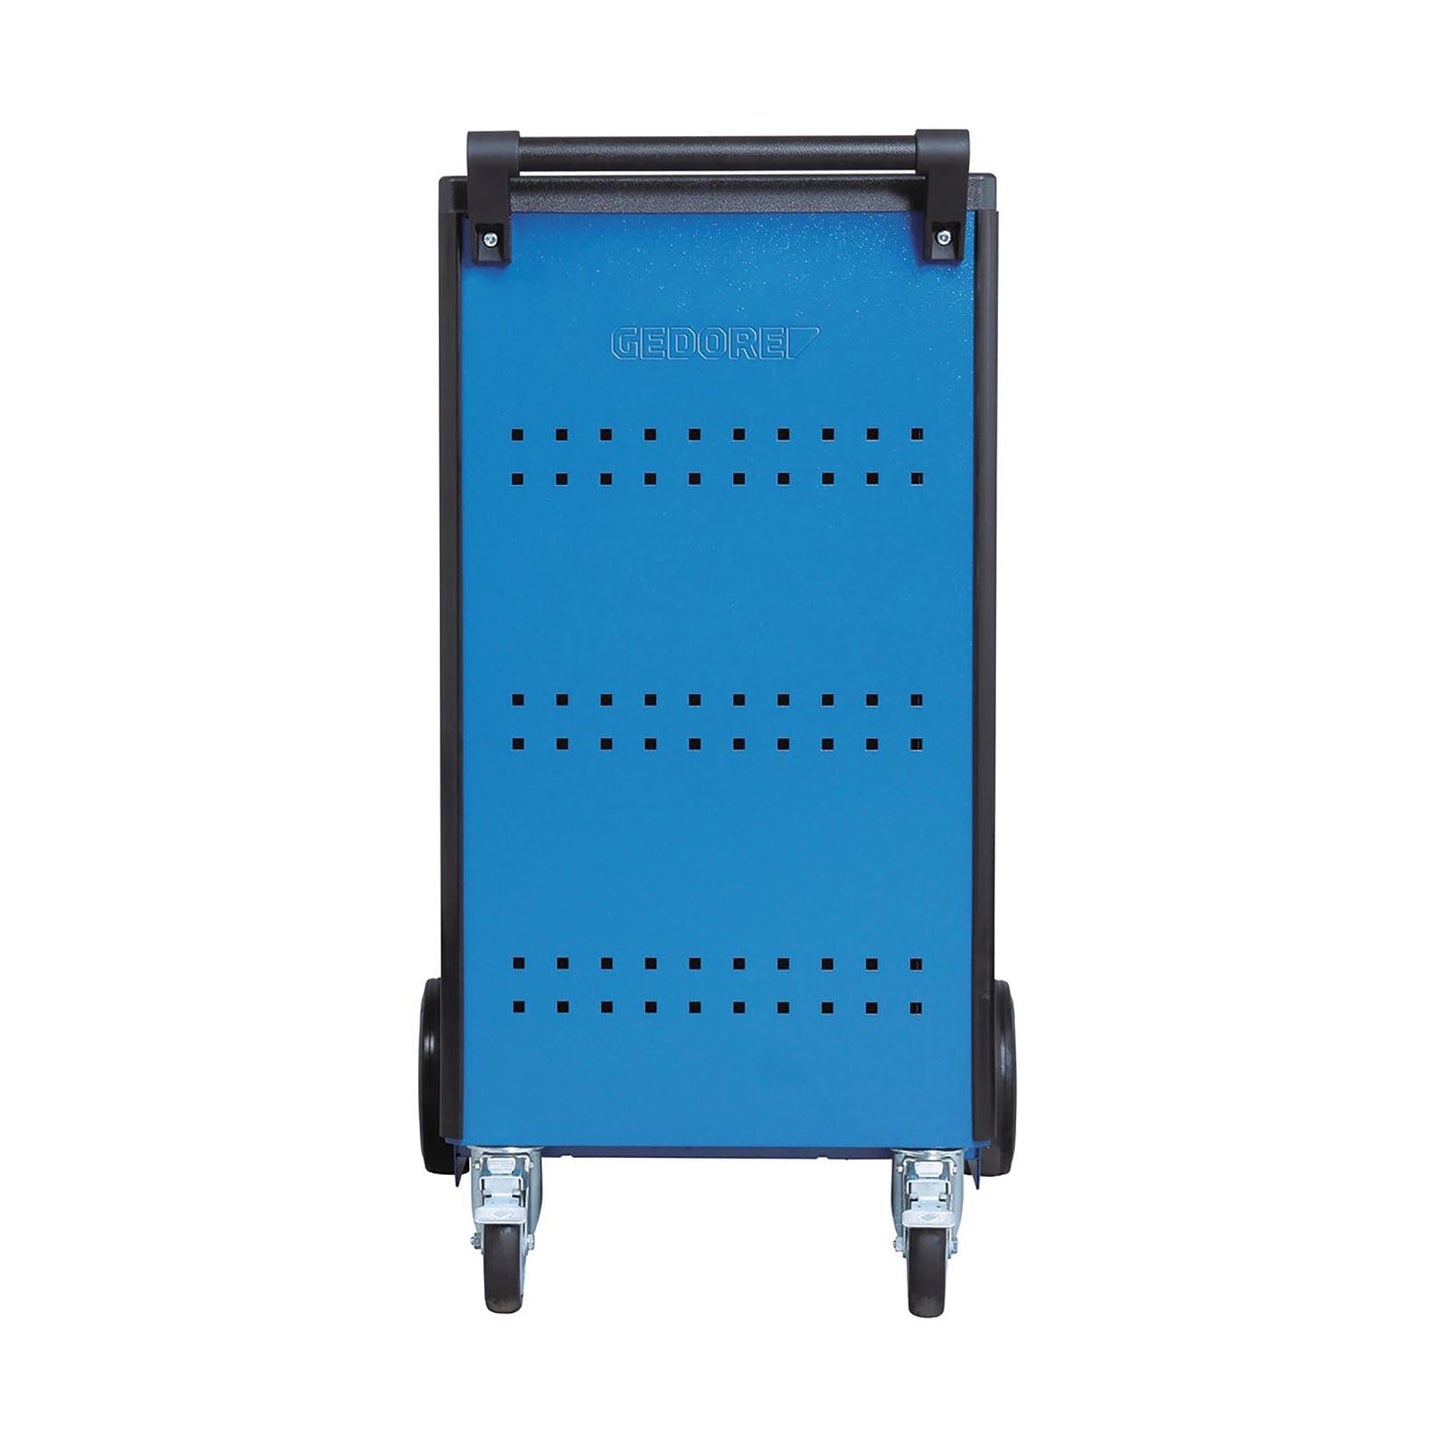 GEDORE 2005 0511 E - Tool trolley with 7 drawers (2827379)